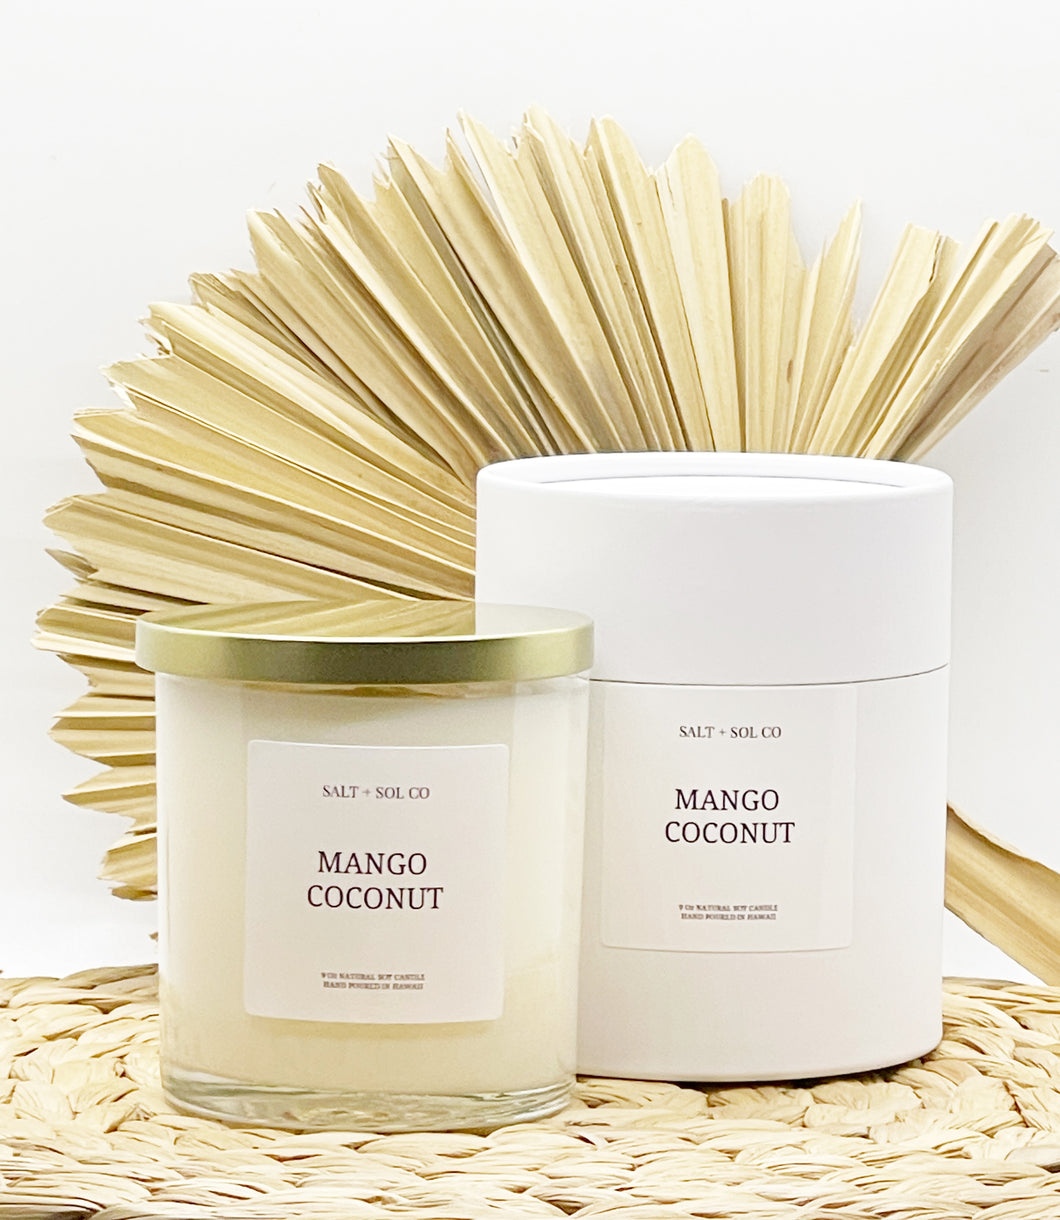 Mango coconut luxury soy wax candle made in Hawaii for sale at salt + SOL co candles